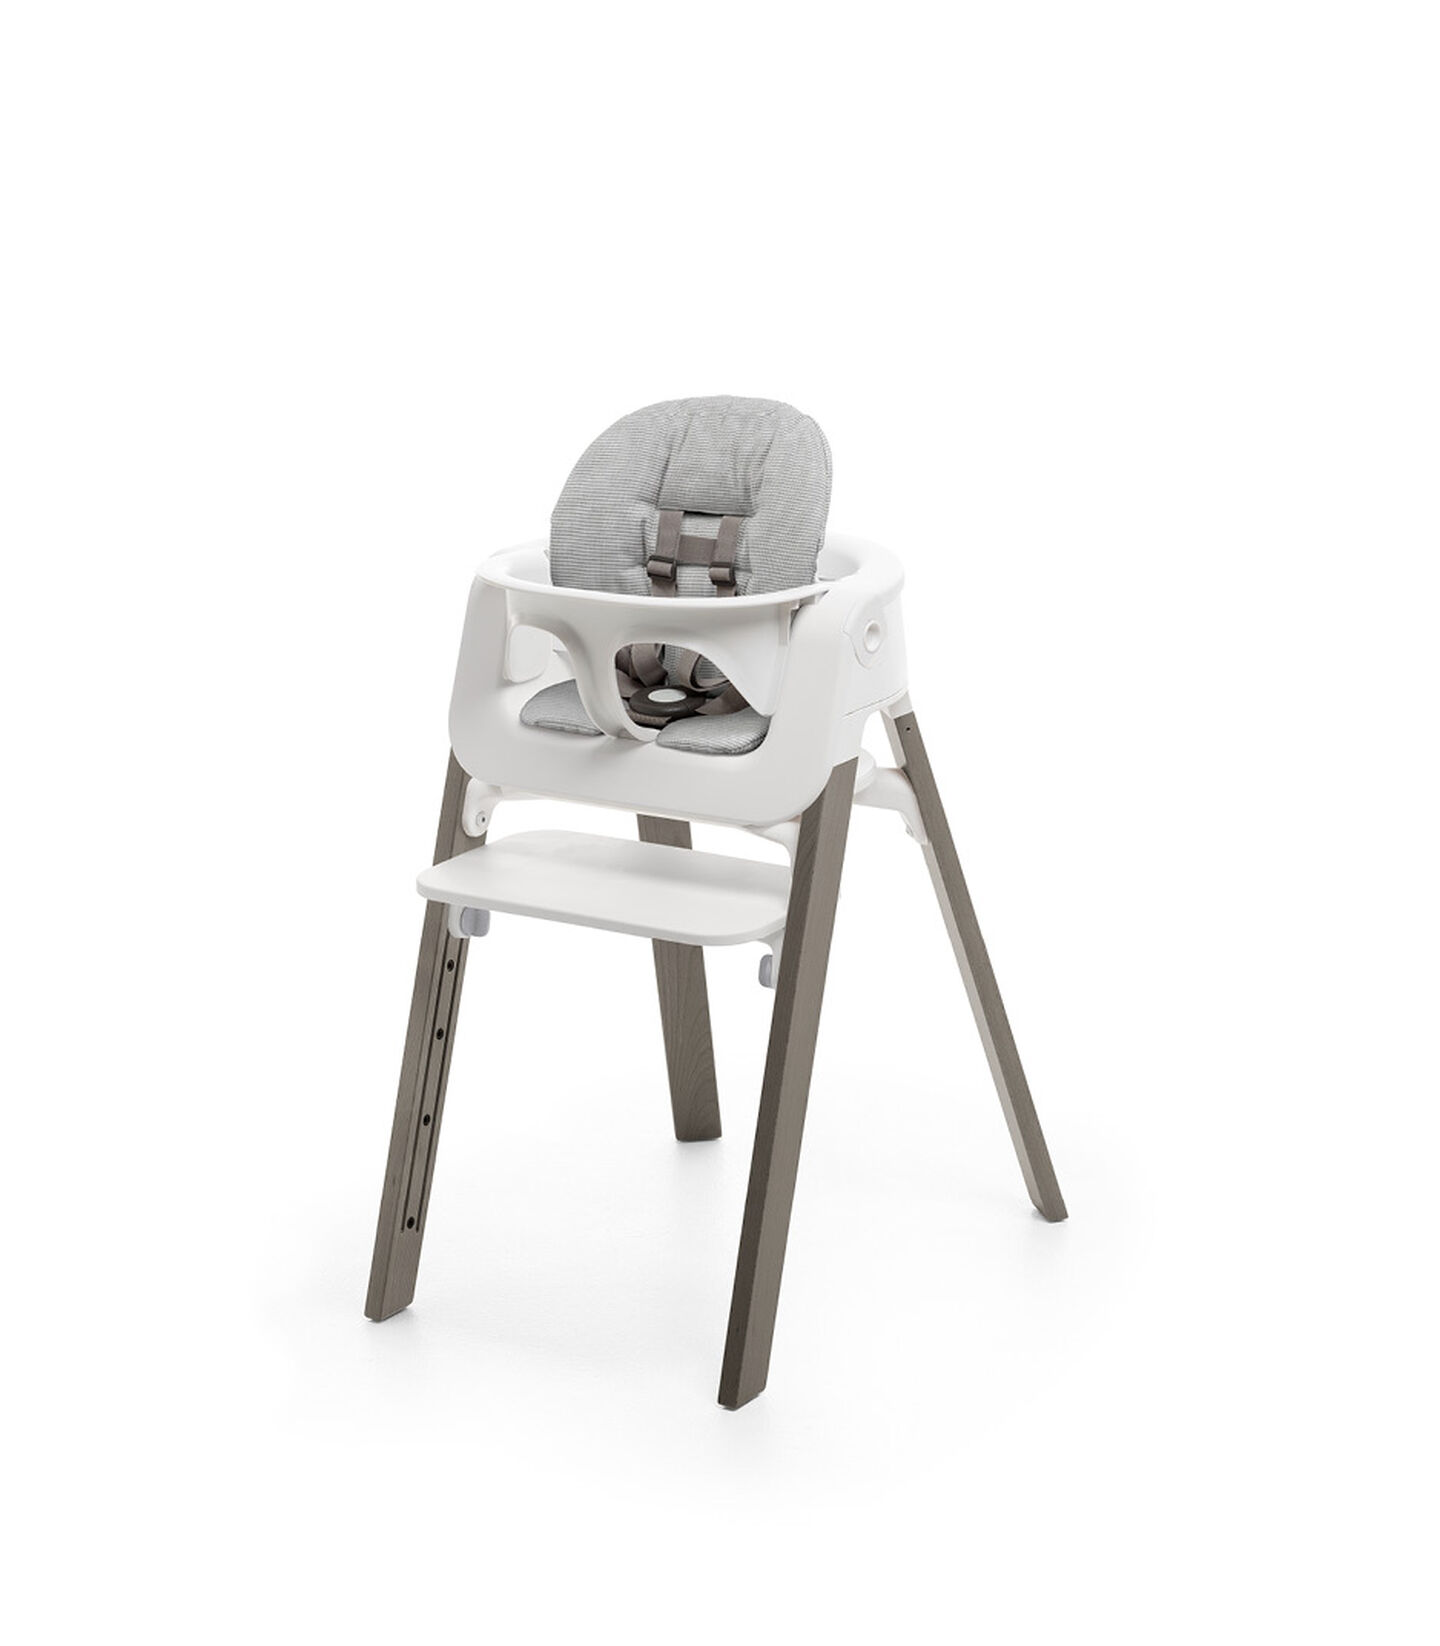 Stokke® Steps™ Chair White Hazy Grey, Blanc/Gris Brume, mainview view 3